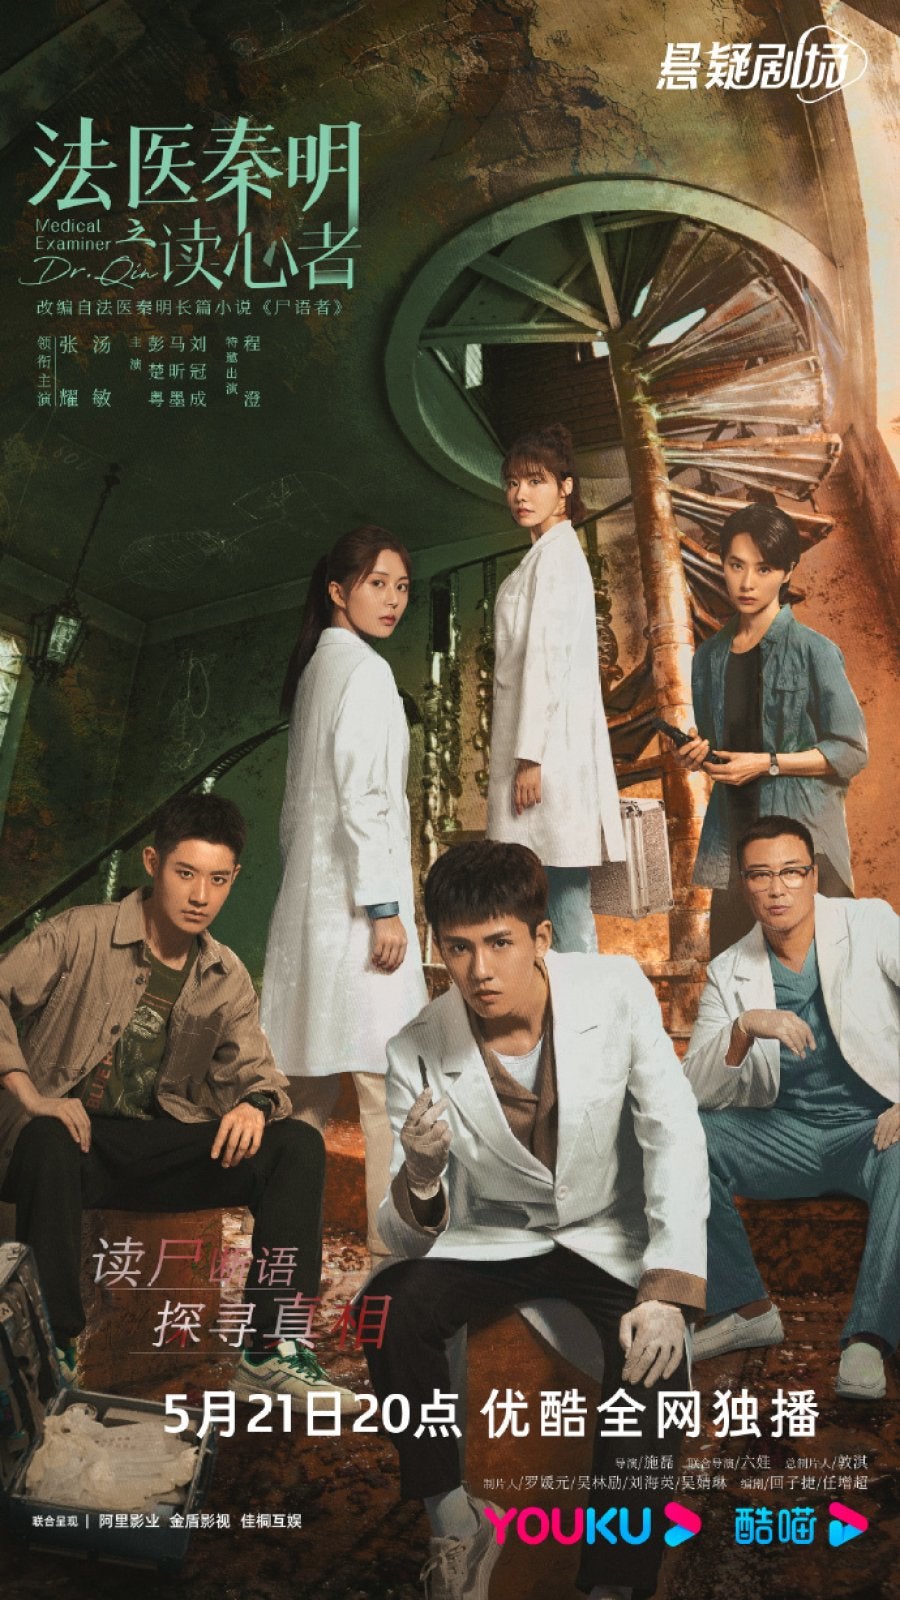 TV ratings for Medical Examiner Dr. Qin: The Mind Reader (法医秦明之读心者) in Colombia. Youku TV series